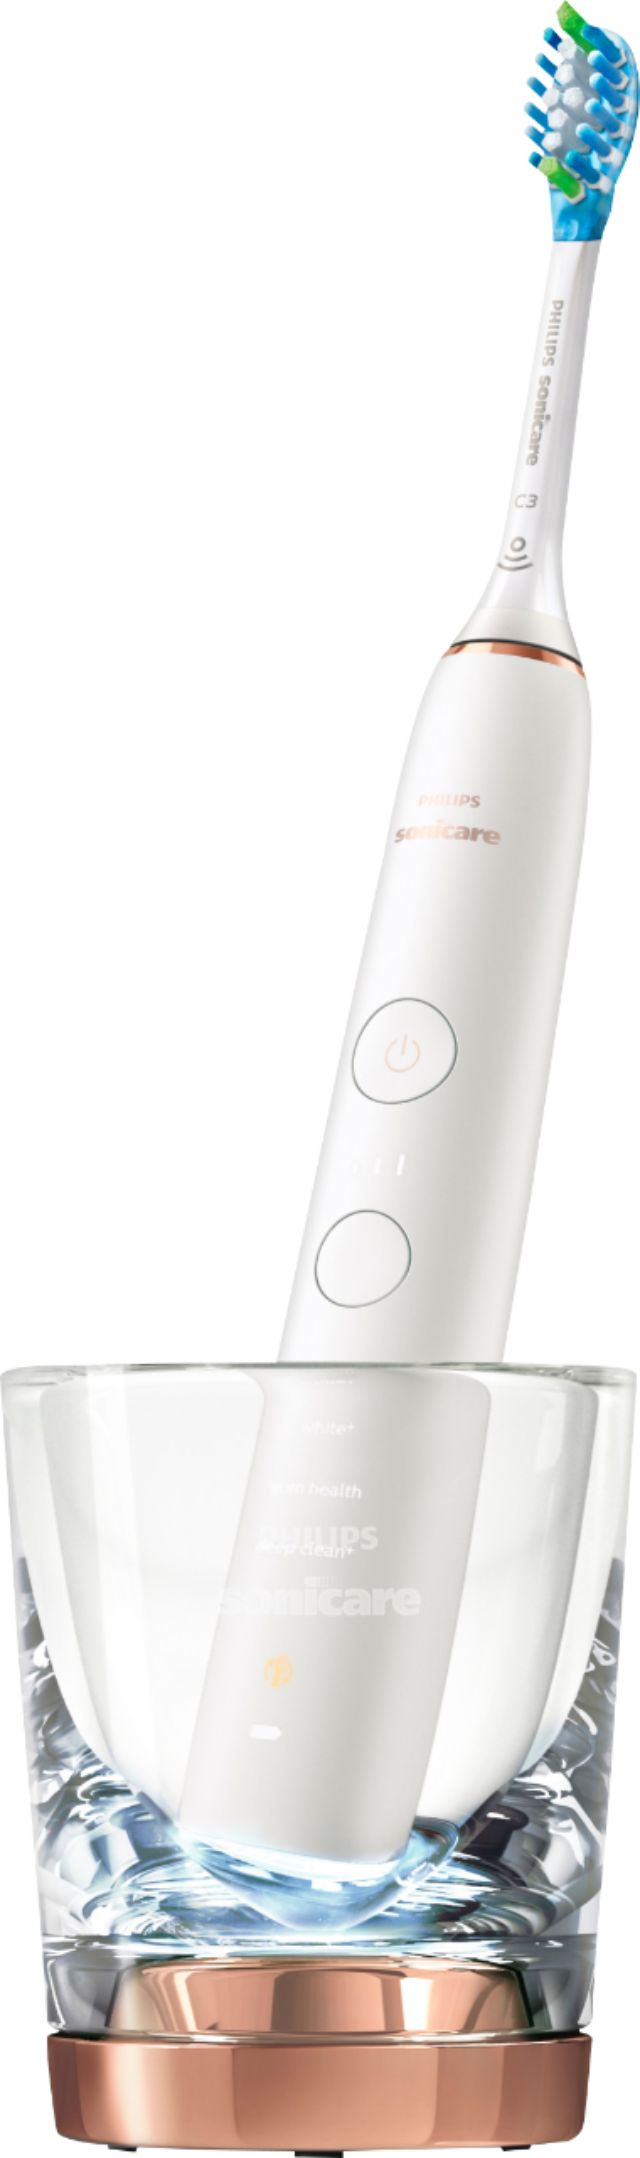 Left View: Oral-B - SmartSeries Pro 6000 Connected Electric Toothbrush - Rose Gold